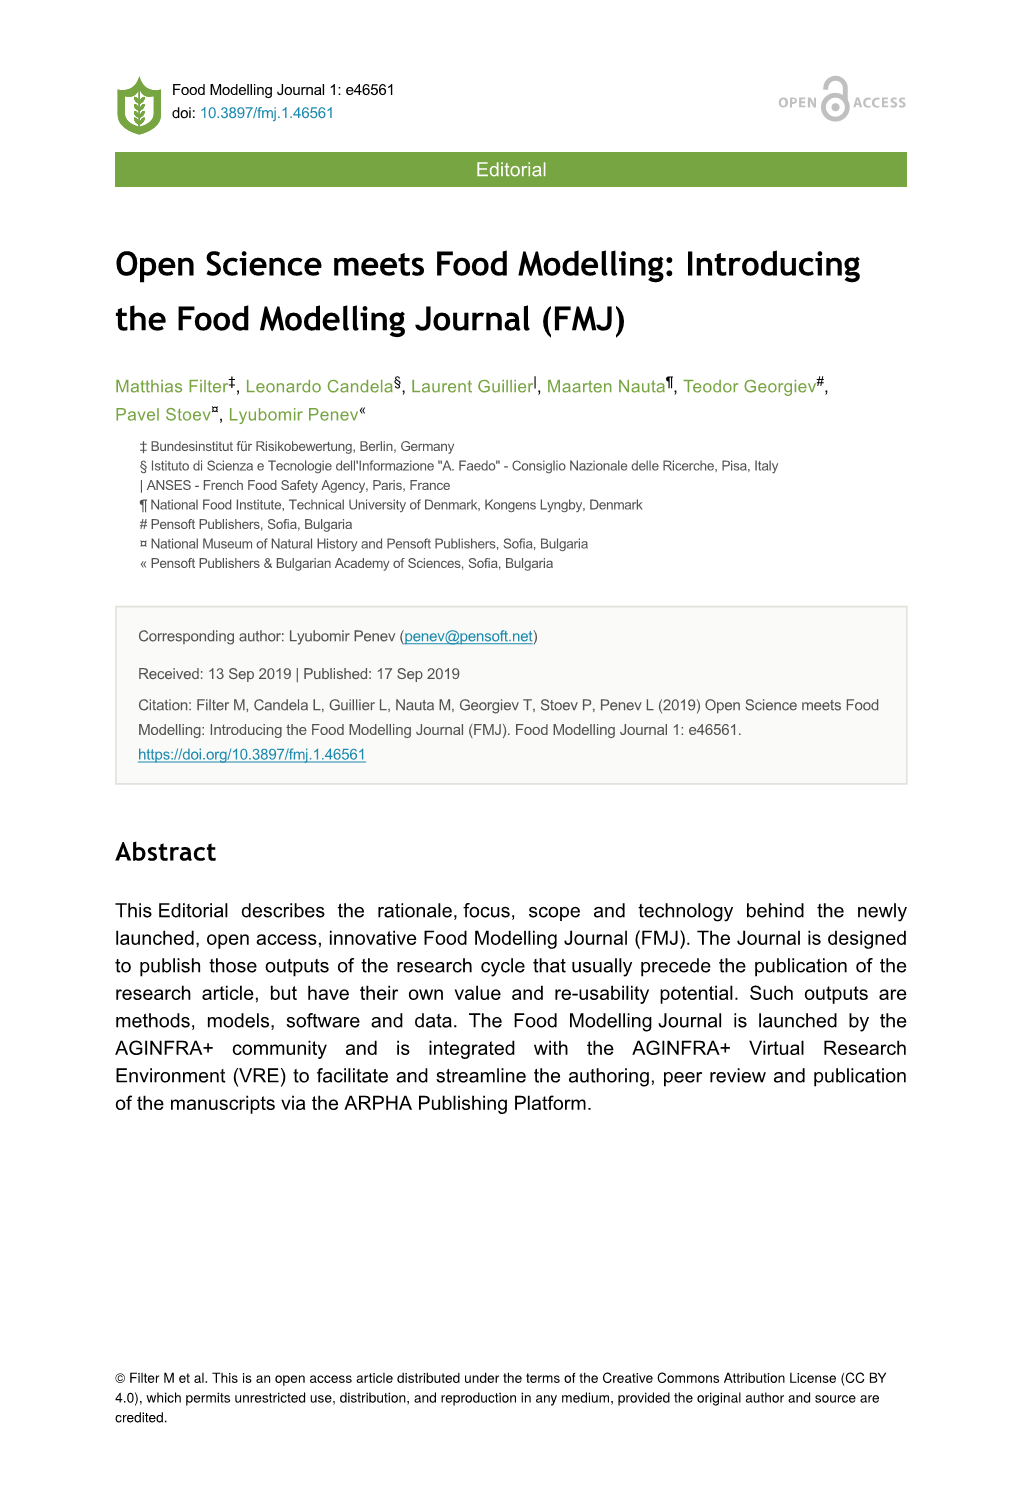 Open Science Meets Food Modelling: Introducing the Food Modelling Journal (FMJ)